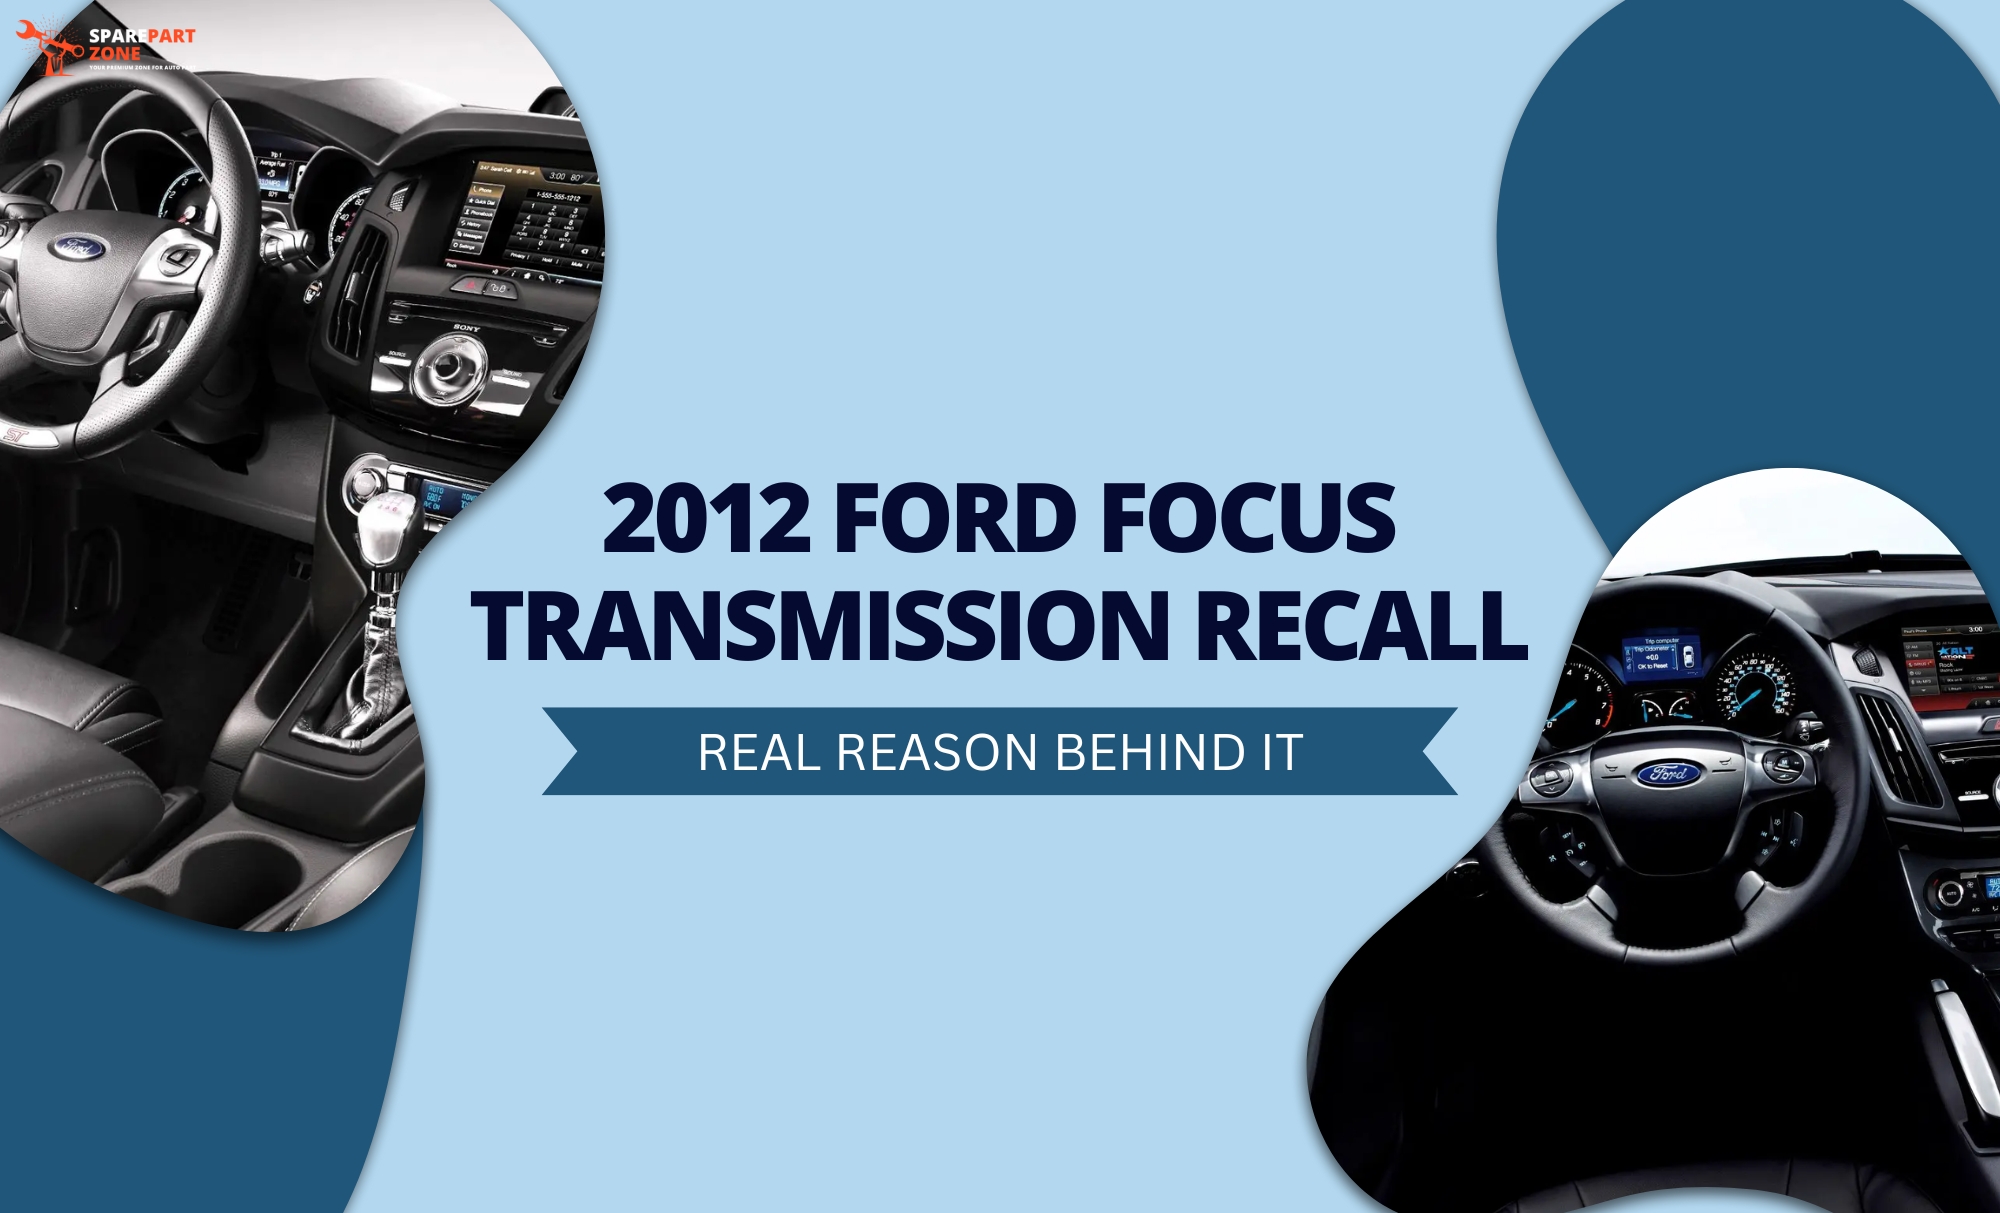 2012 ford focus transmission recall EXPLAINED Spare Part Zone